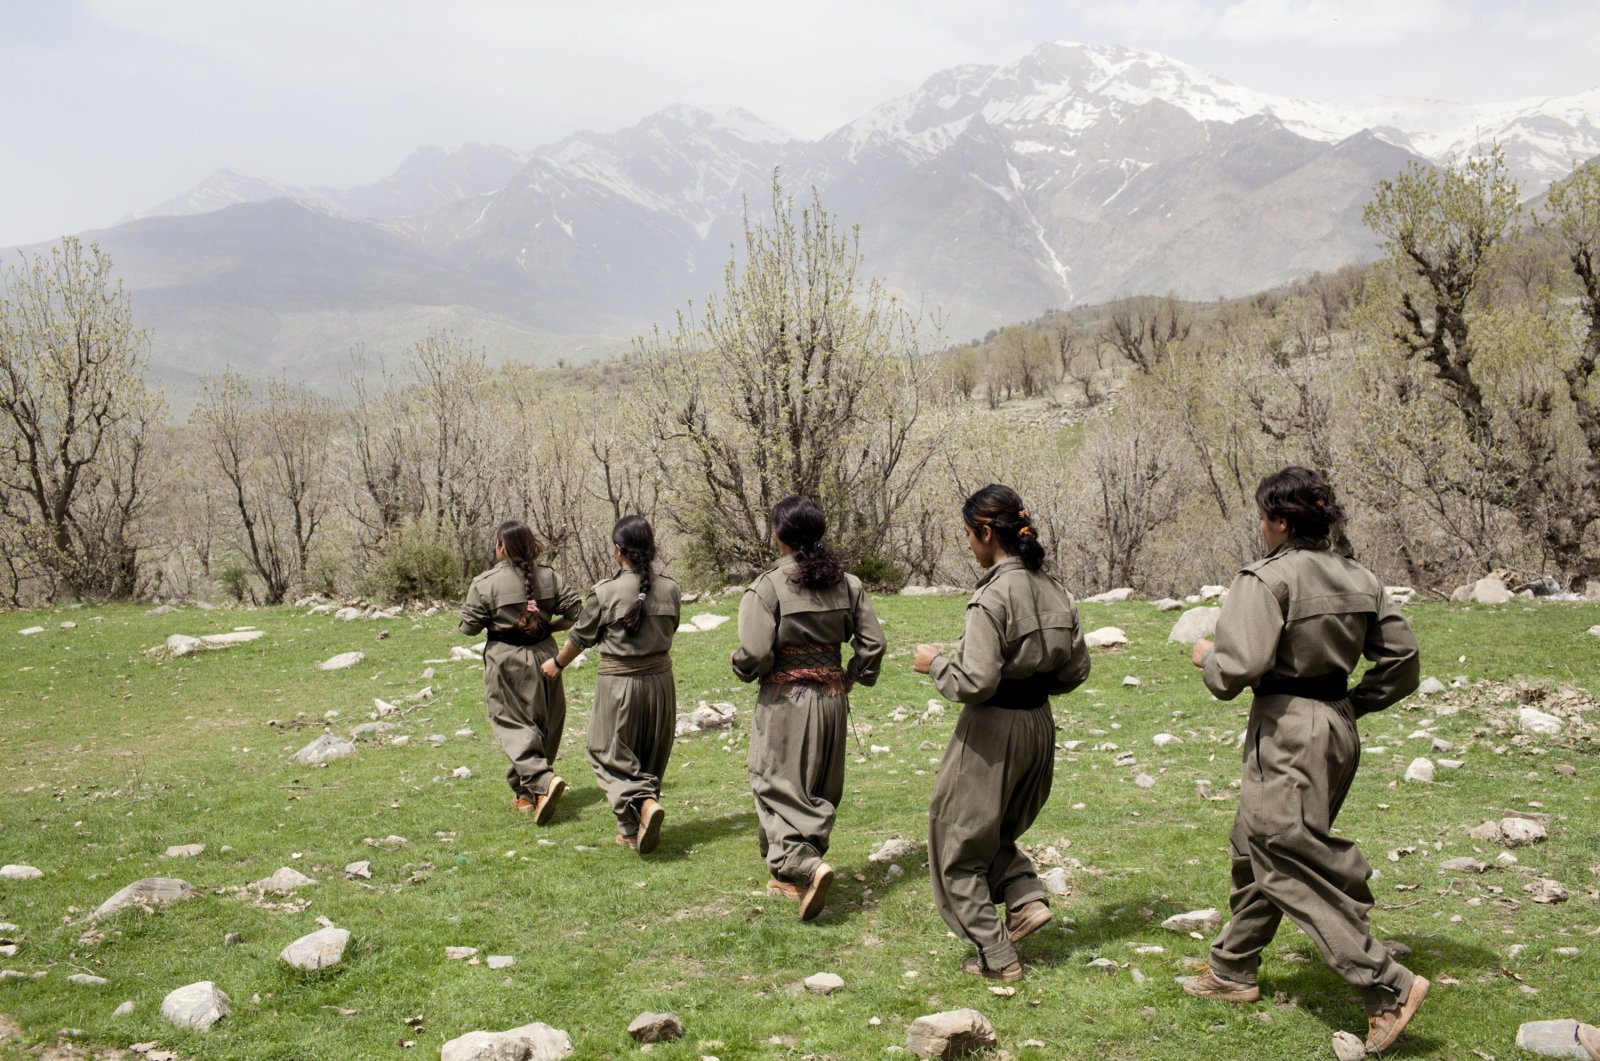 Female PKK terrorists in their camp situated in the mountains on the Iran-Iraq border, April 8, 2012. (Getty Images)